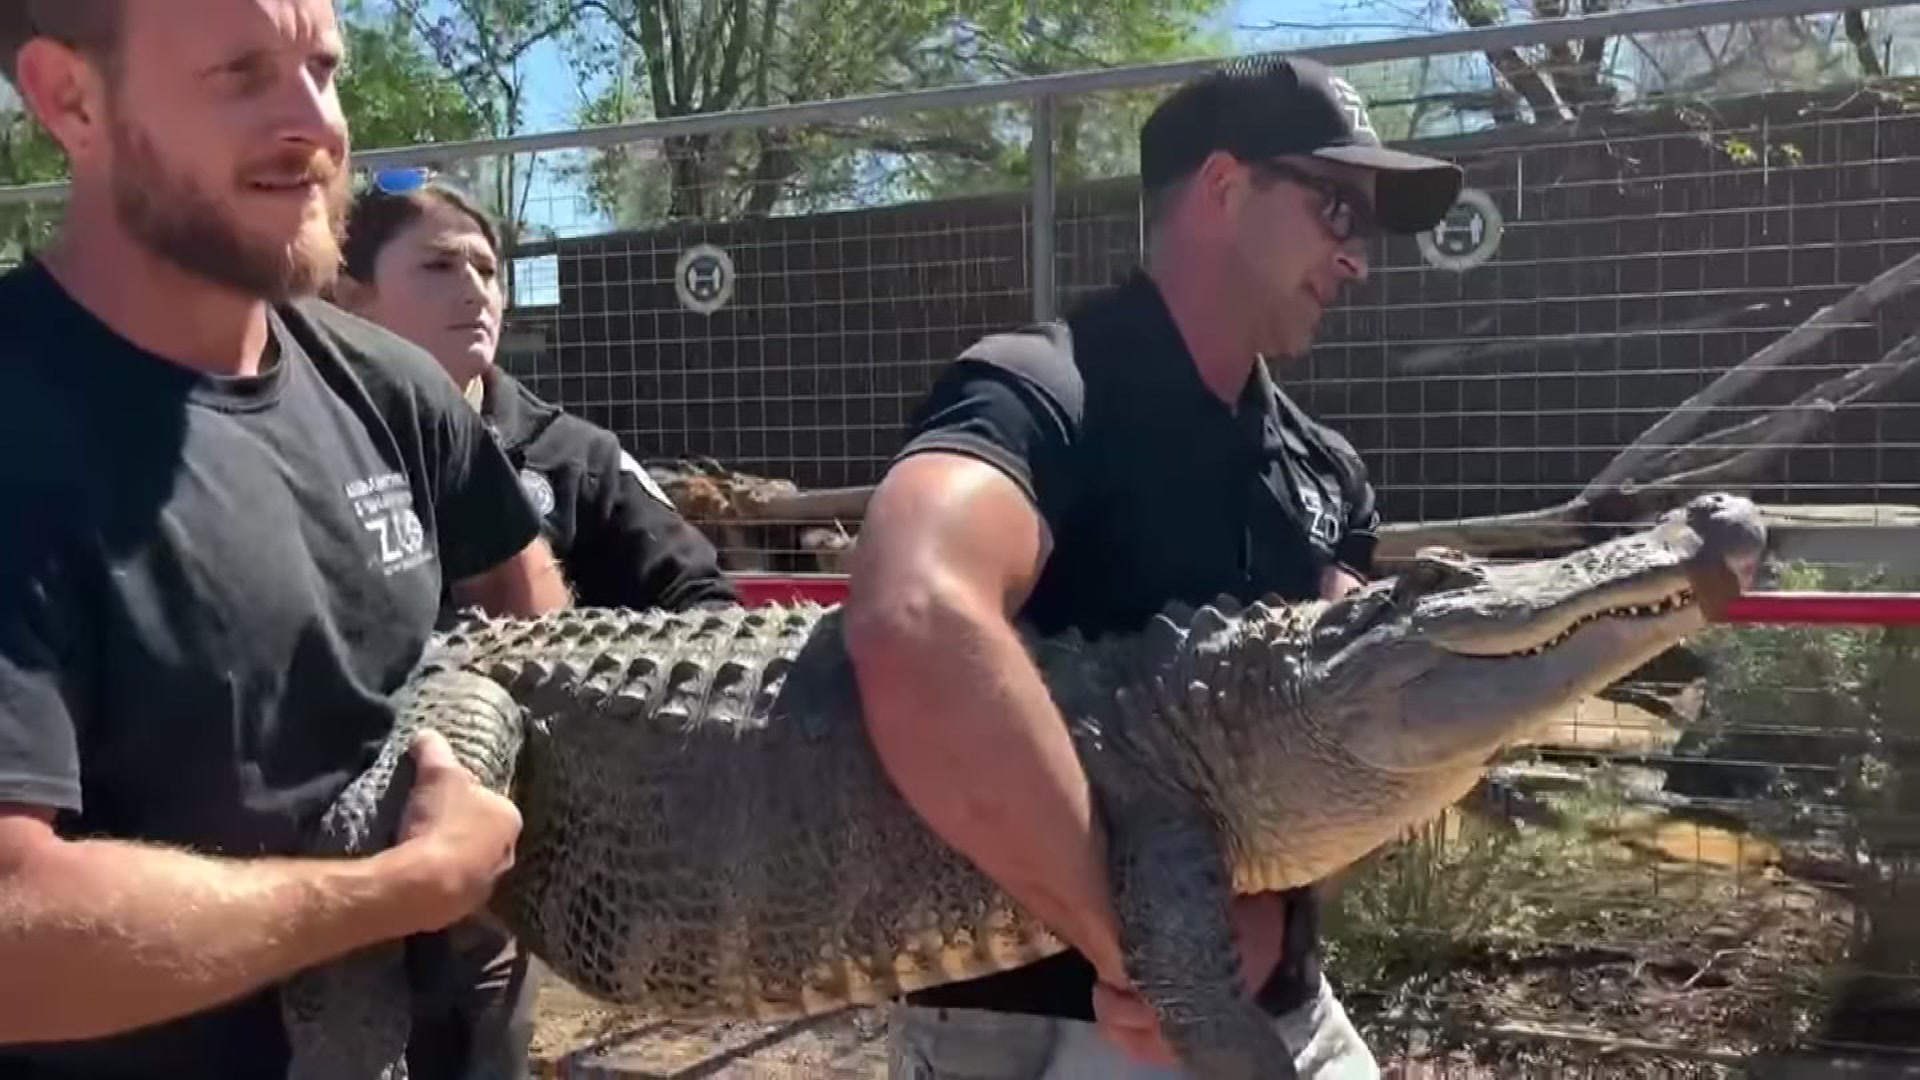 Gator Stolen From Texas Zoo 20 Years Ago Returns Home